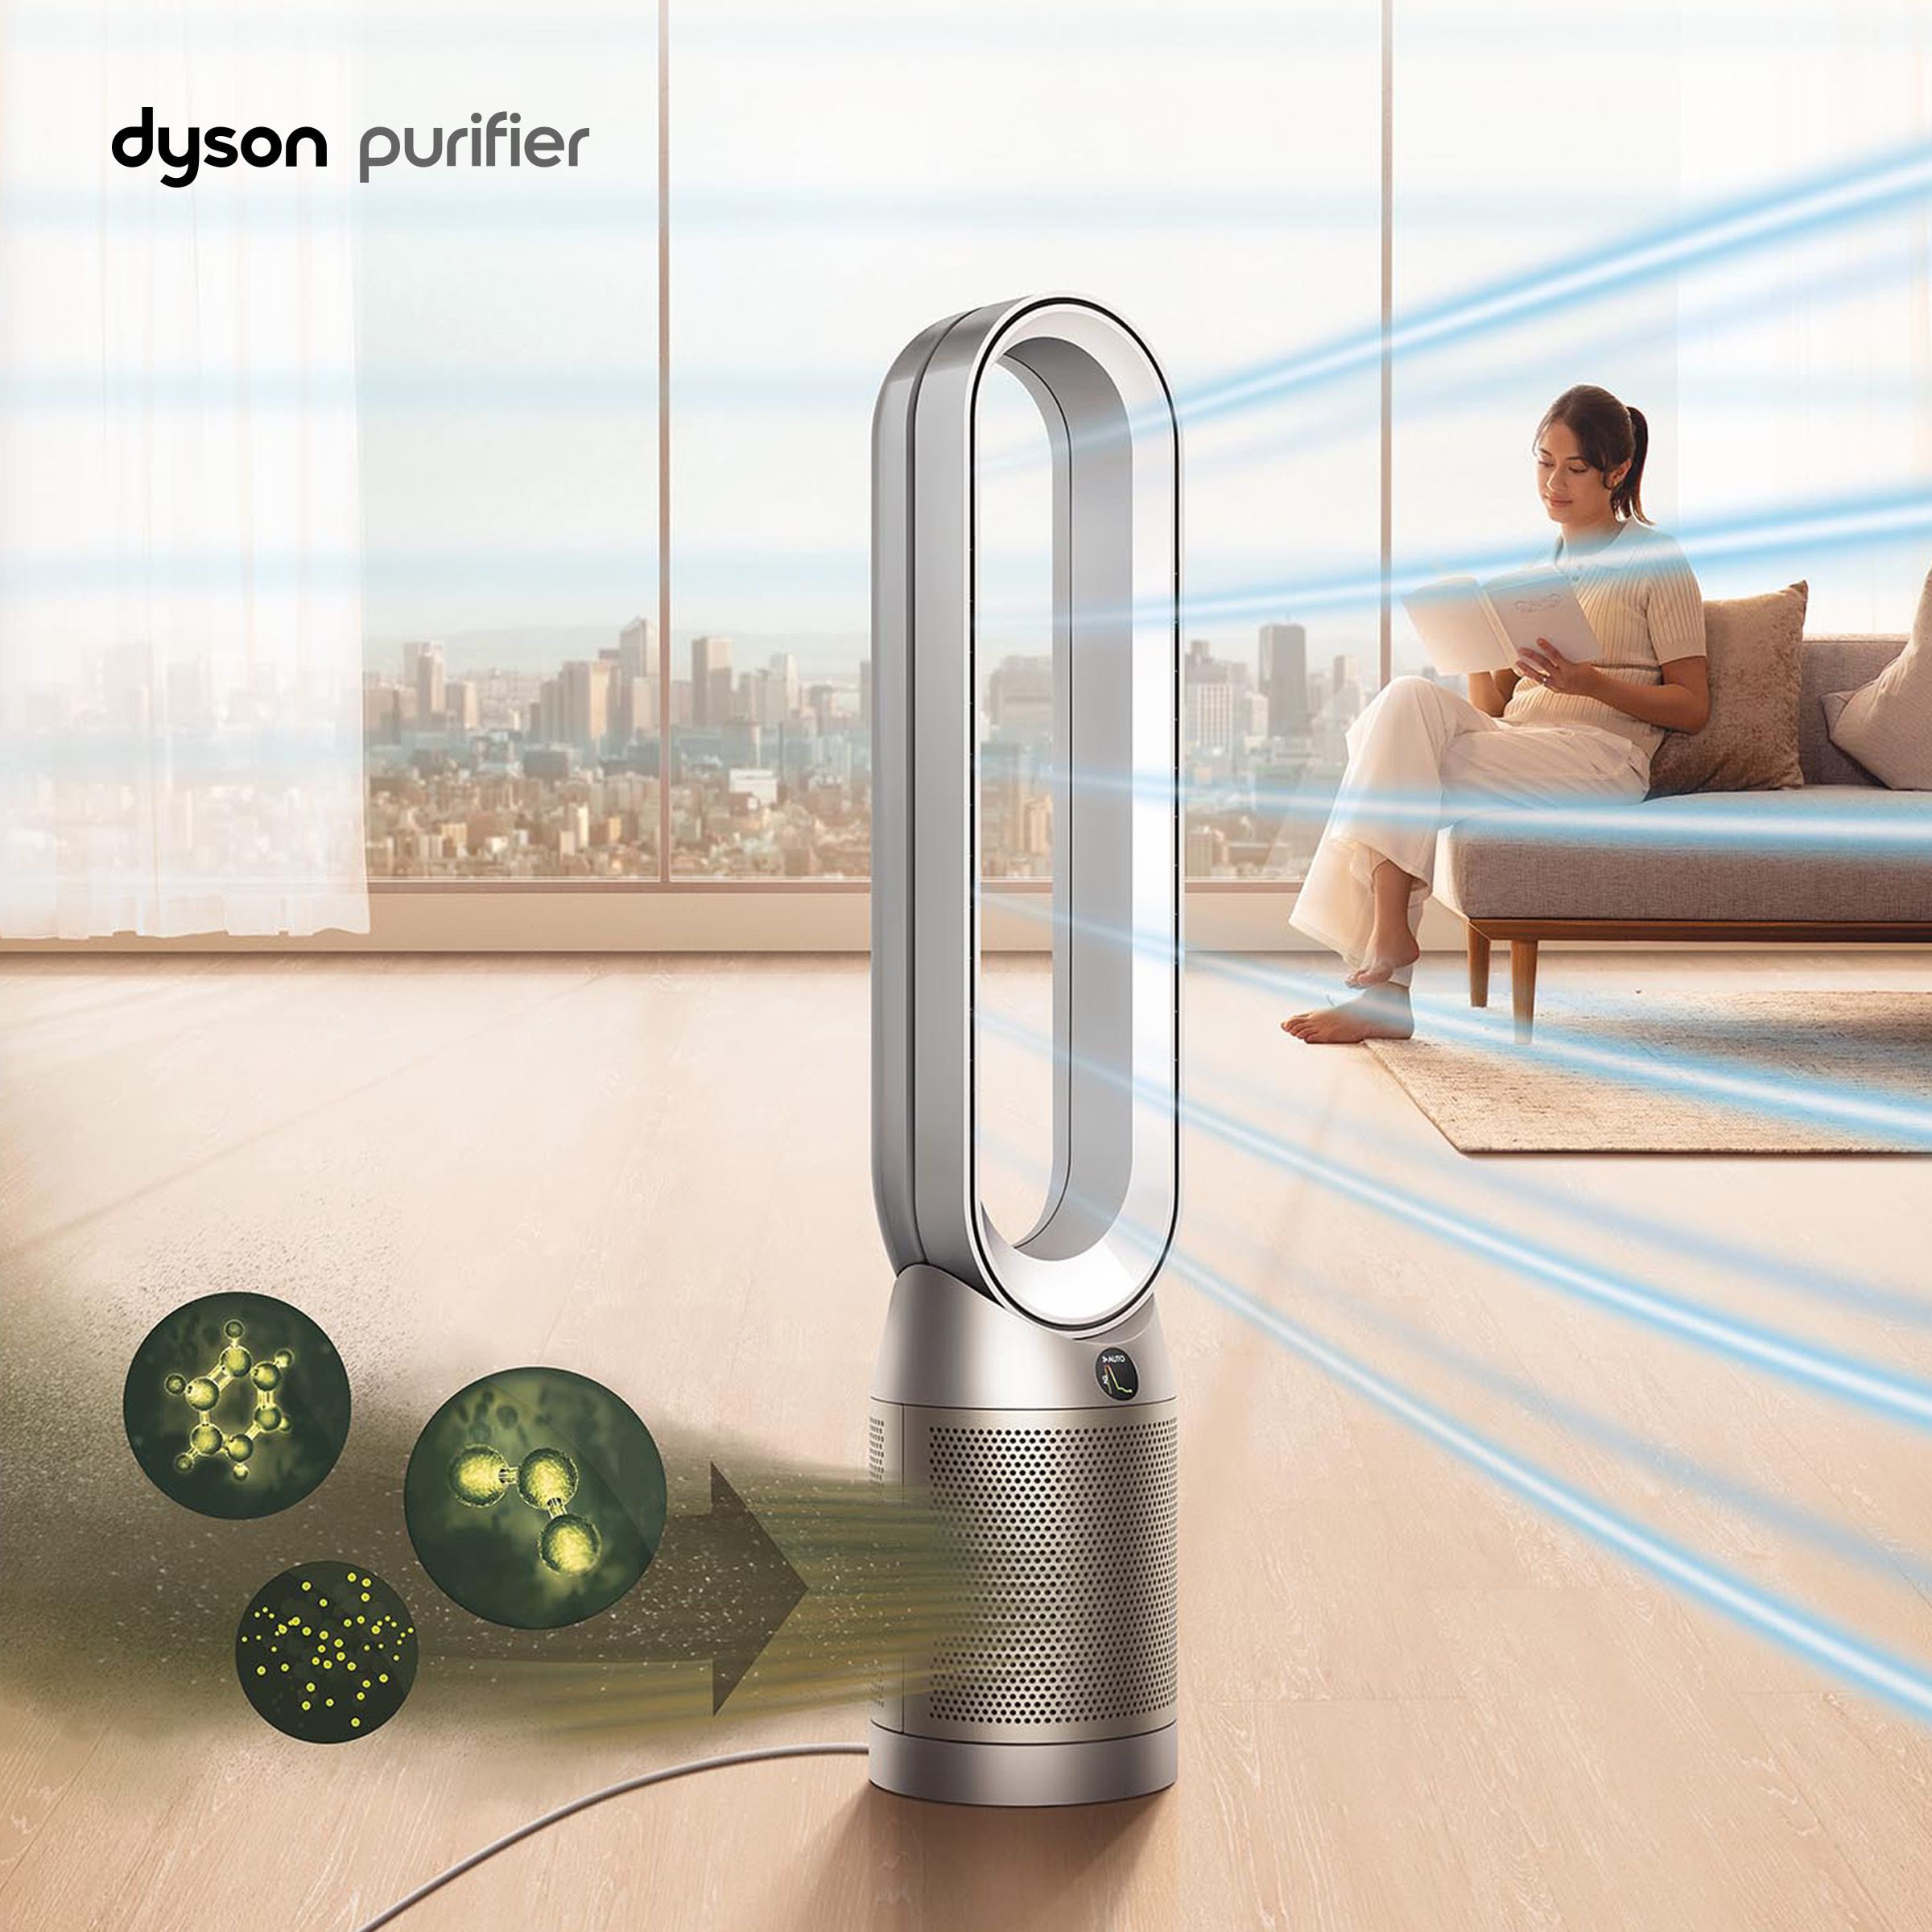 Enjoy purified air that cools you this summer. Dyson Purifiers capture pollution that can increase in the summer heat, whilst cooling you too